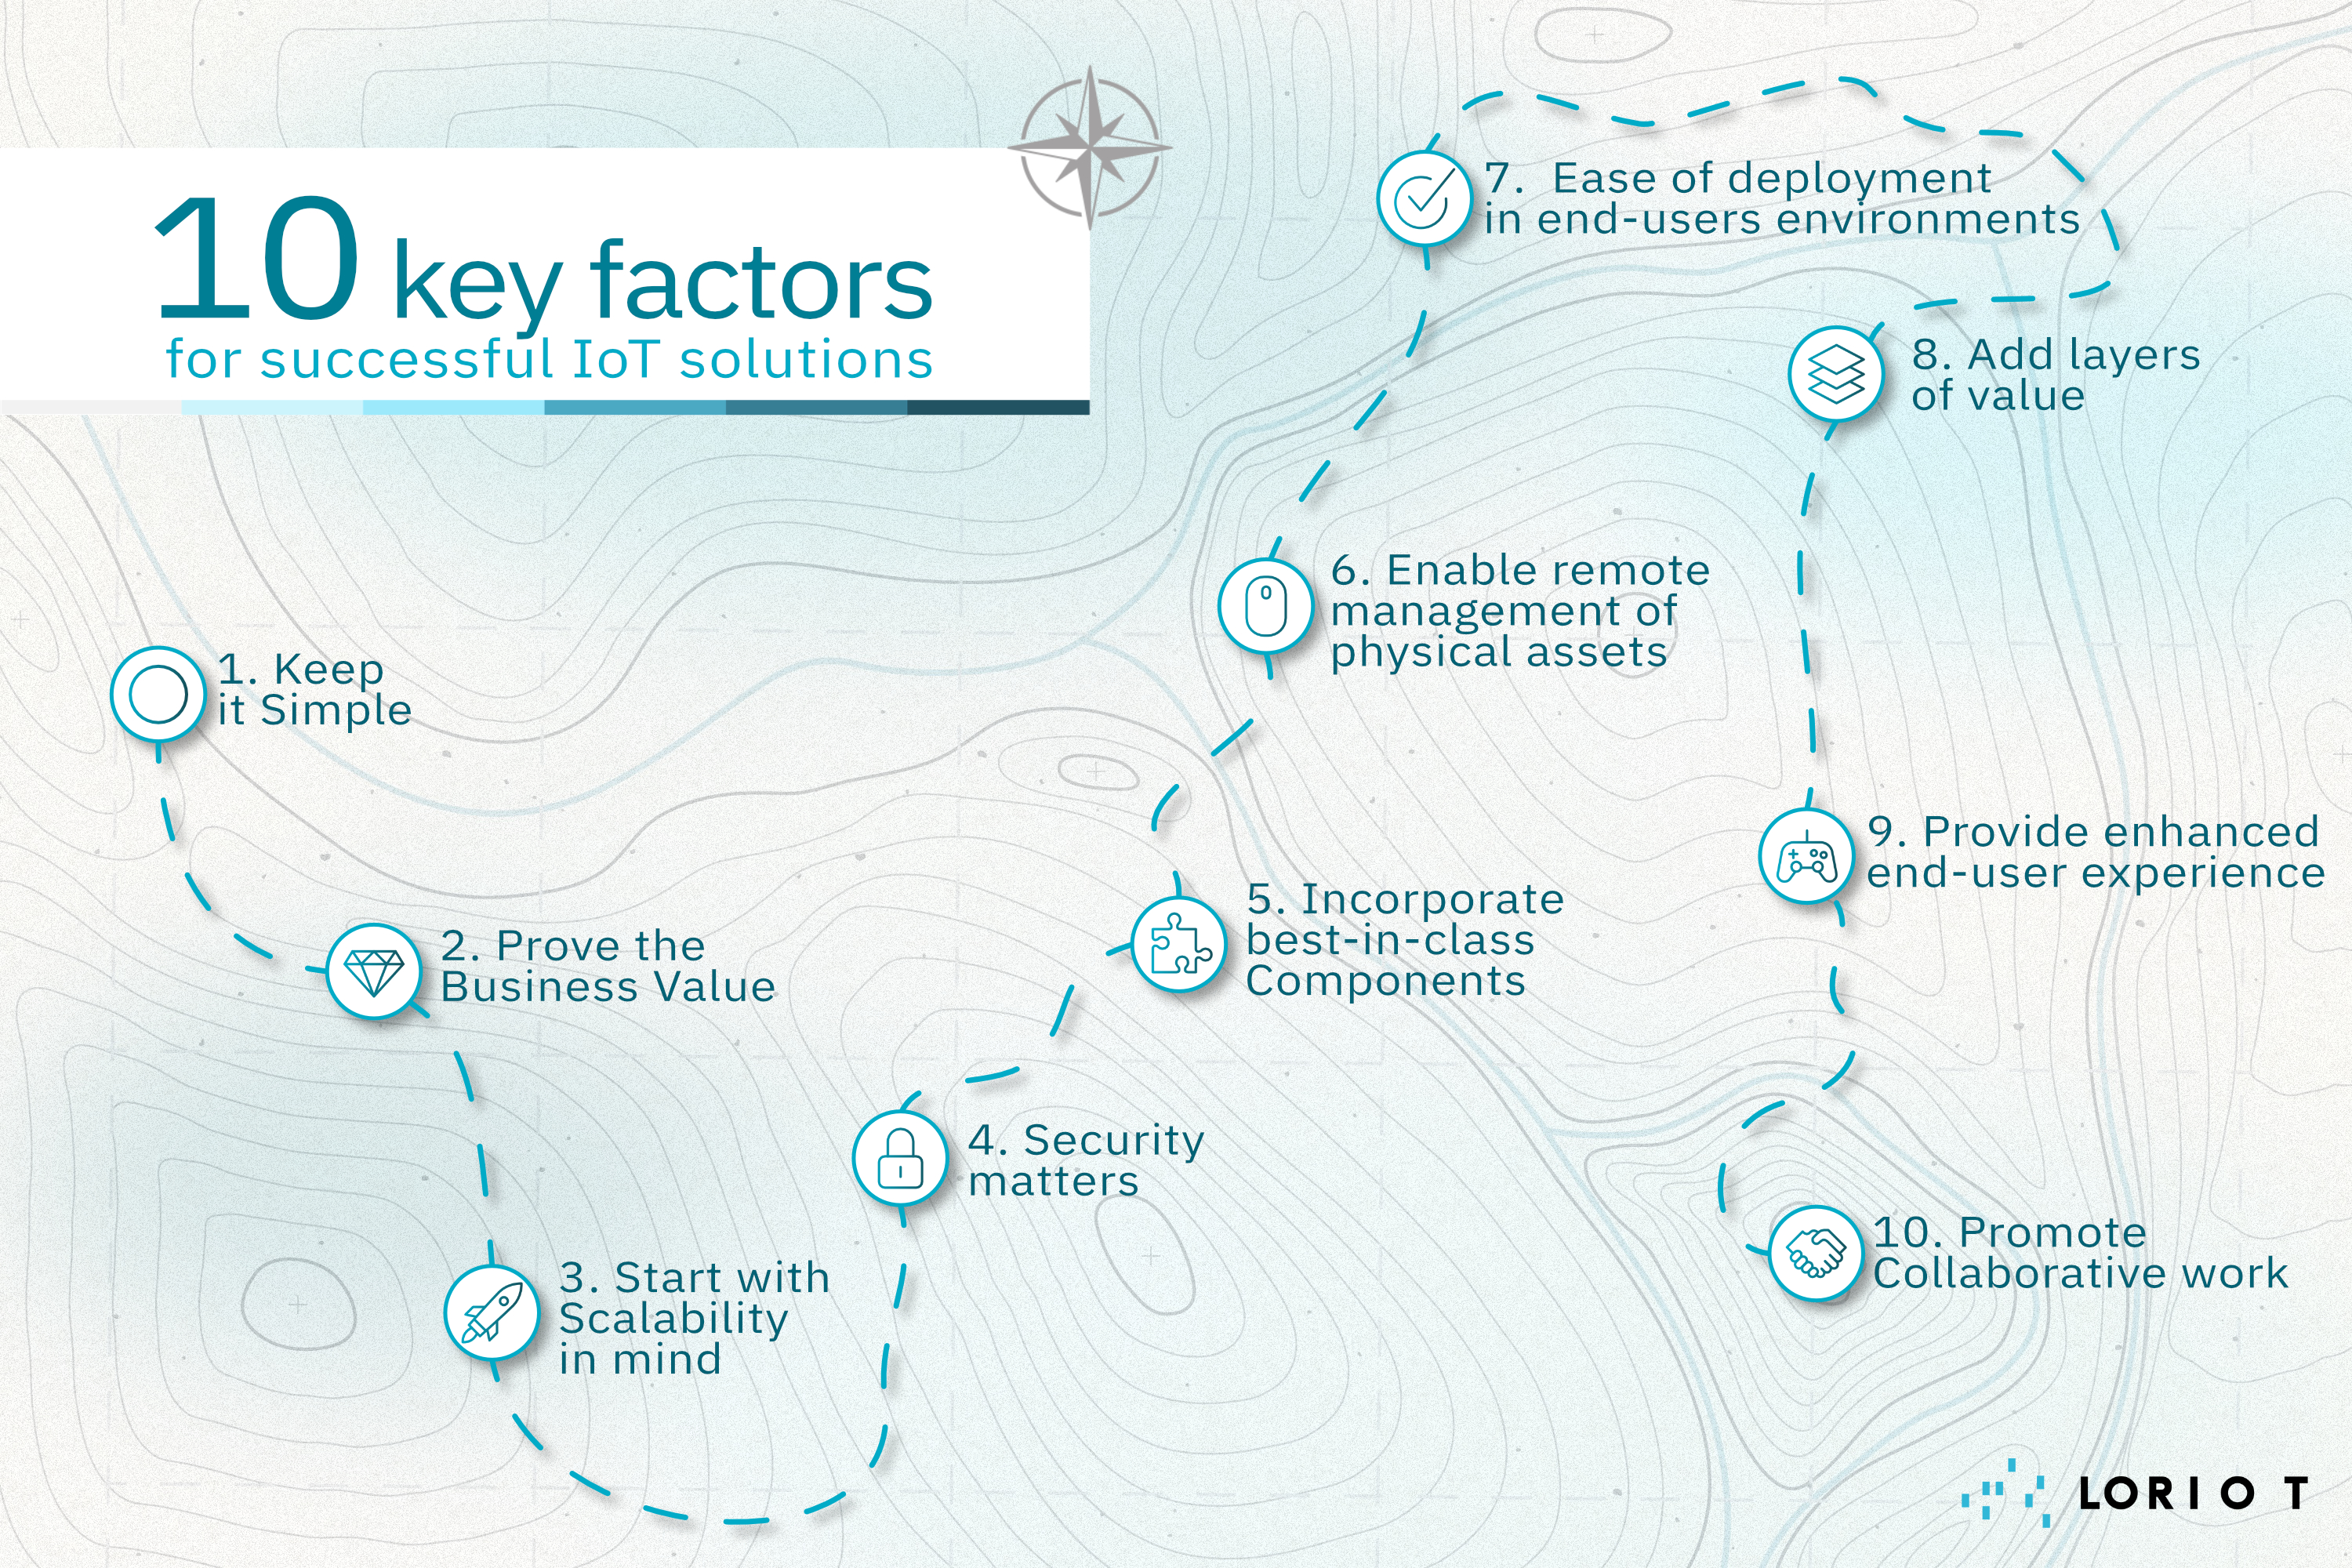 10 key factors for successful IoT solutions infographic